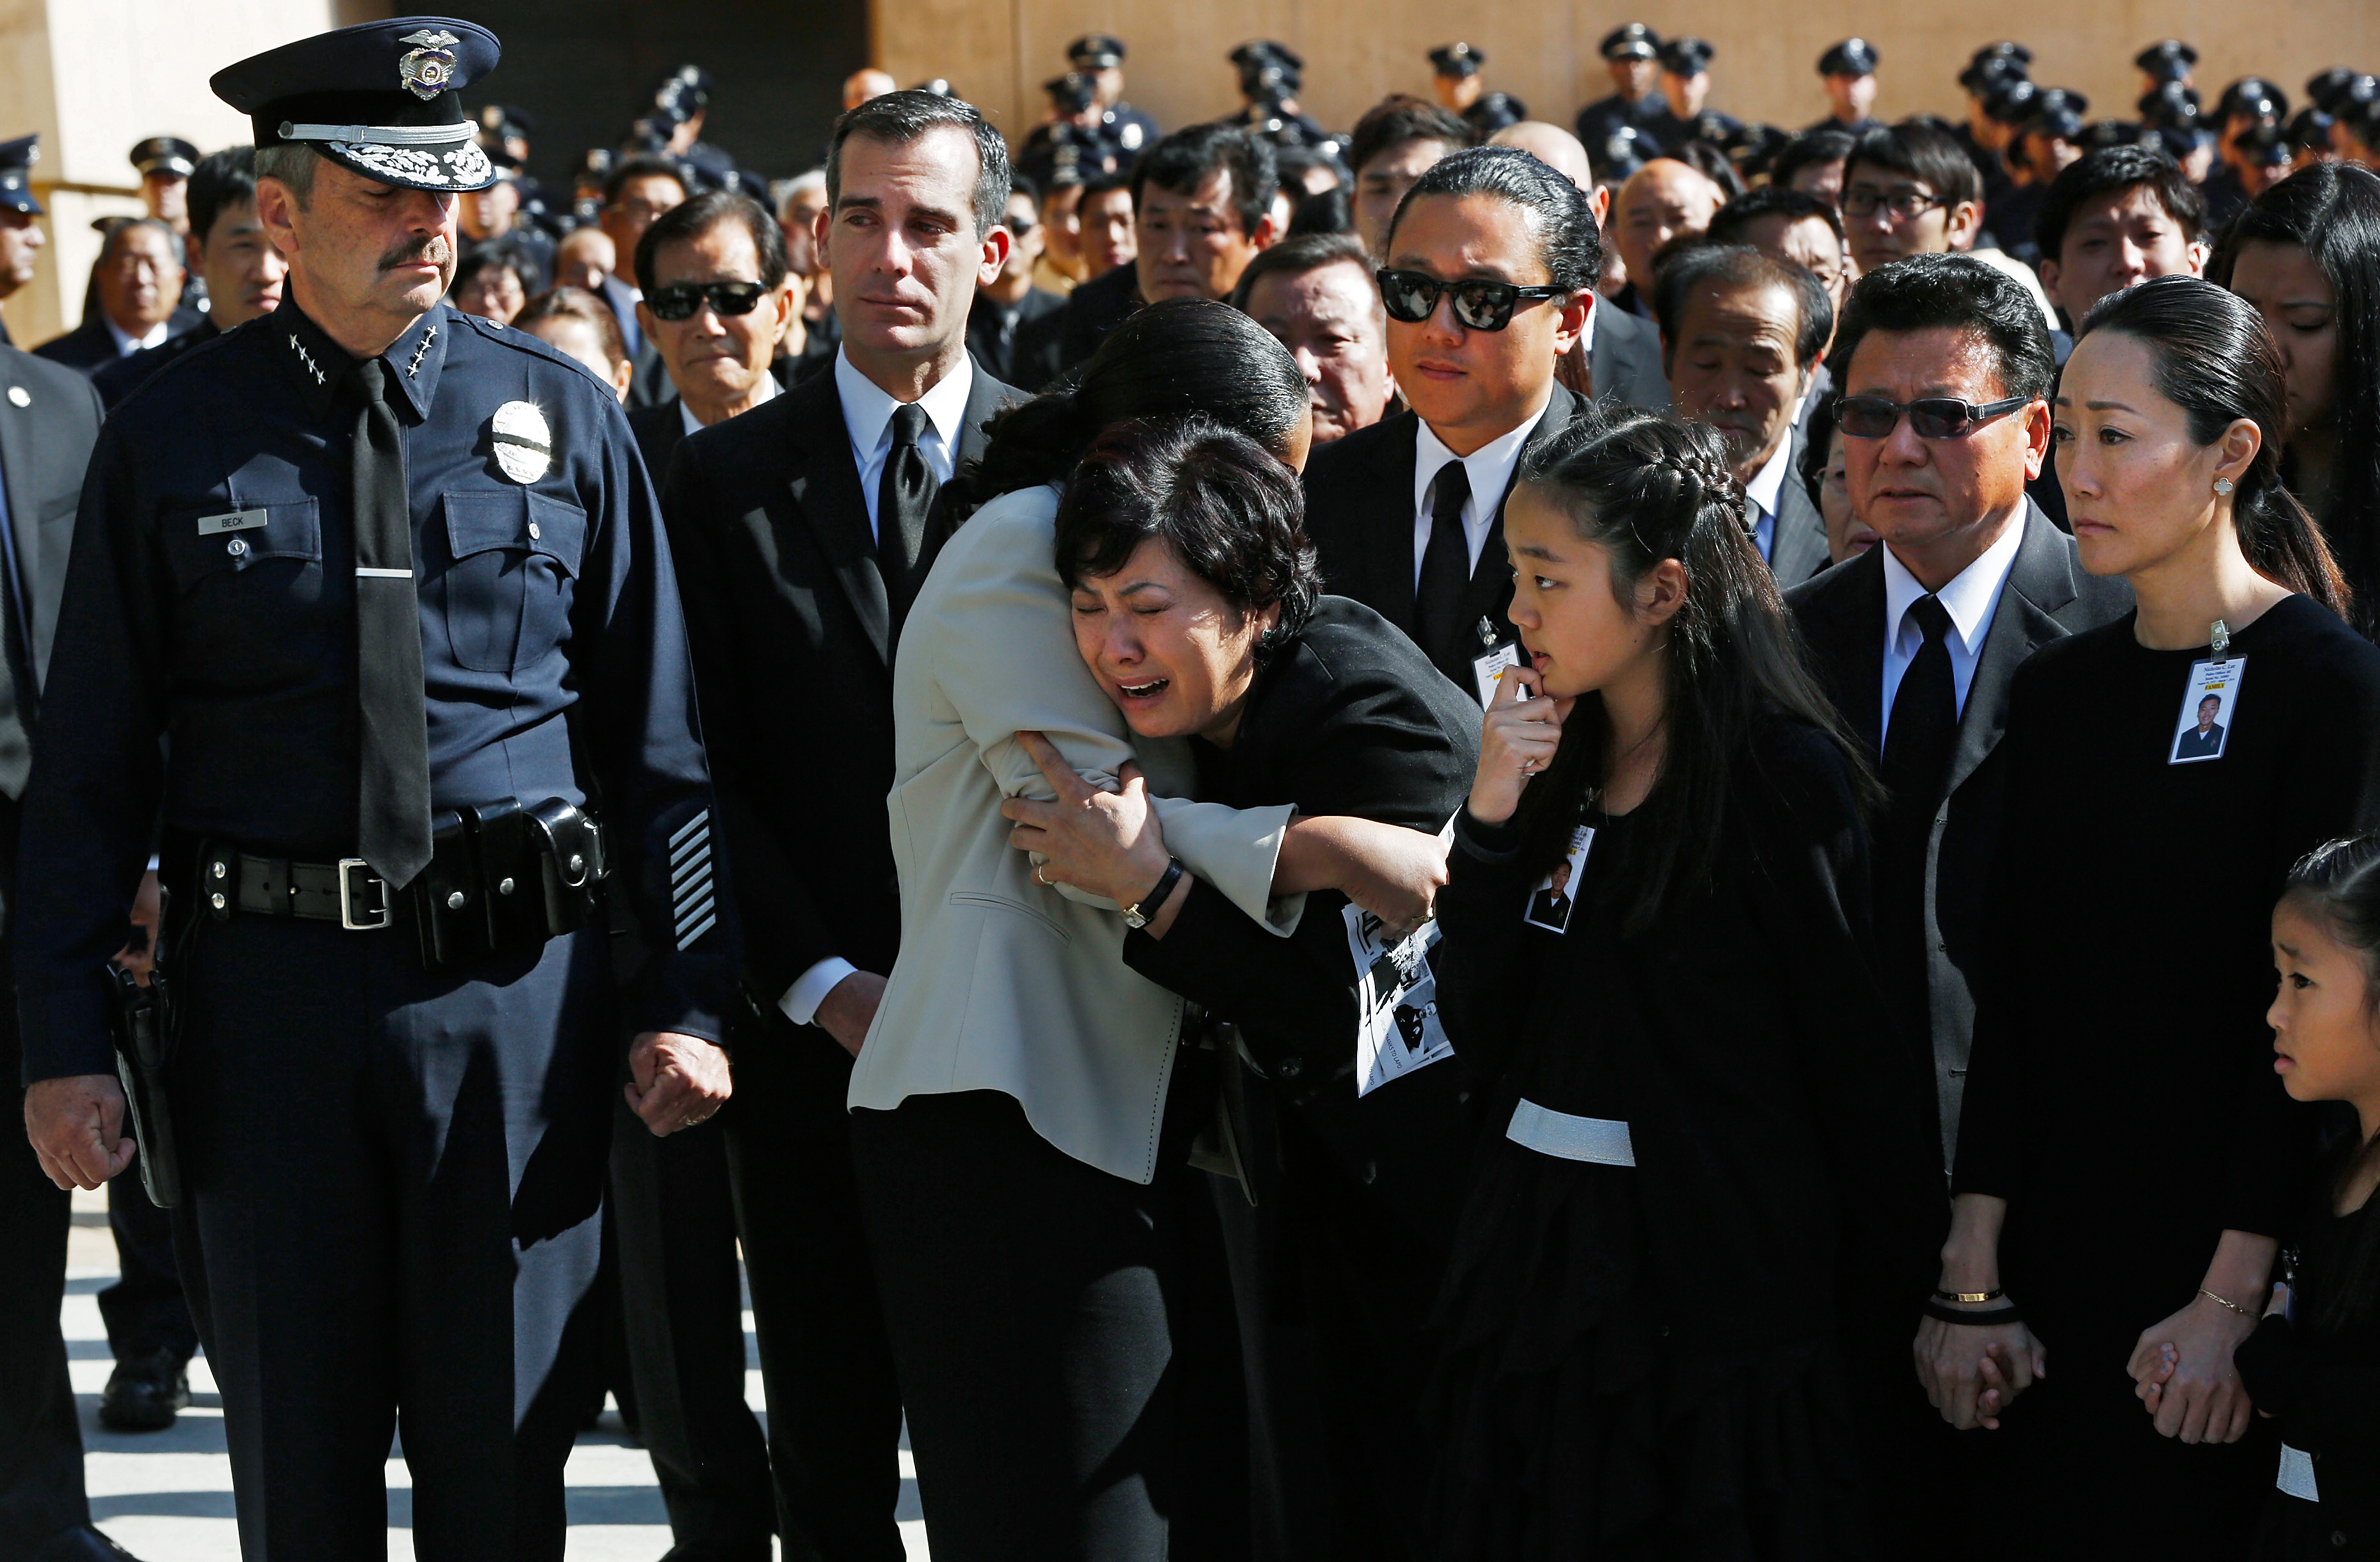 Choung Ja Lee, mother of fallen Los Angeles Police Department Nicholas Choung Lee, fourth from left, is helped by a LAPD female police officer, as her son's casket leaves a funeral mass at the Cathedral of Our Lady of the Angels in Los Angeles Thursday, March 13, 2014. Others from left include Los Angeles Police Chief Charlie Beck, Mayor Eric Garcetti, Lee's daughter Jalen, middle front, brother Danny, center rear, father Heung Jae Lee, and wife Cathy Kim, right.  Lee, 40, died when the squad car he and his partner were in collided with a trash truck in Beverly Hills on March 7. (AP Photo/Damian Dovarganes)